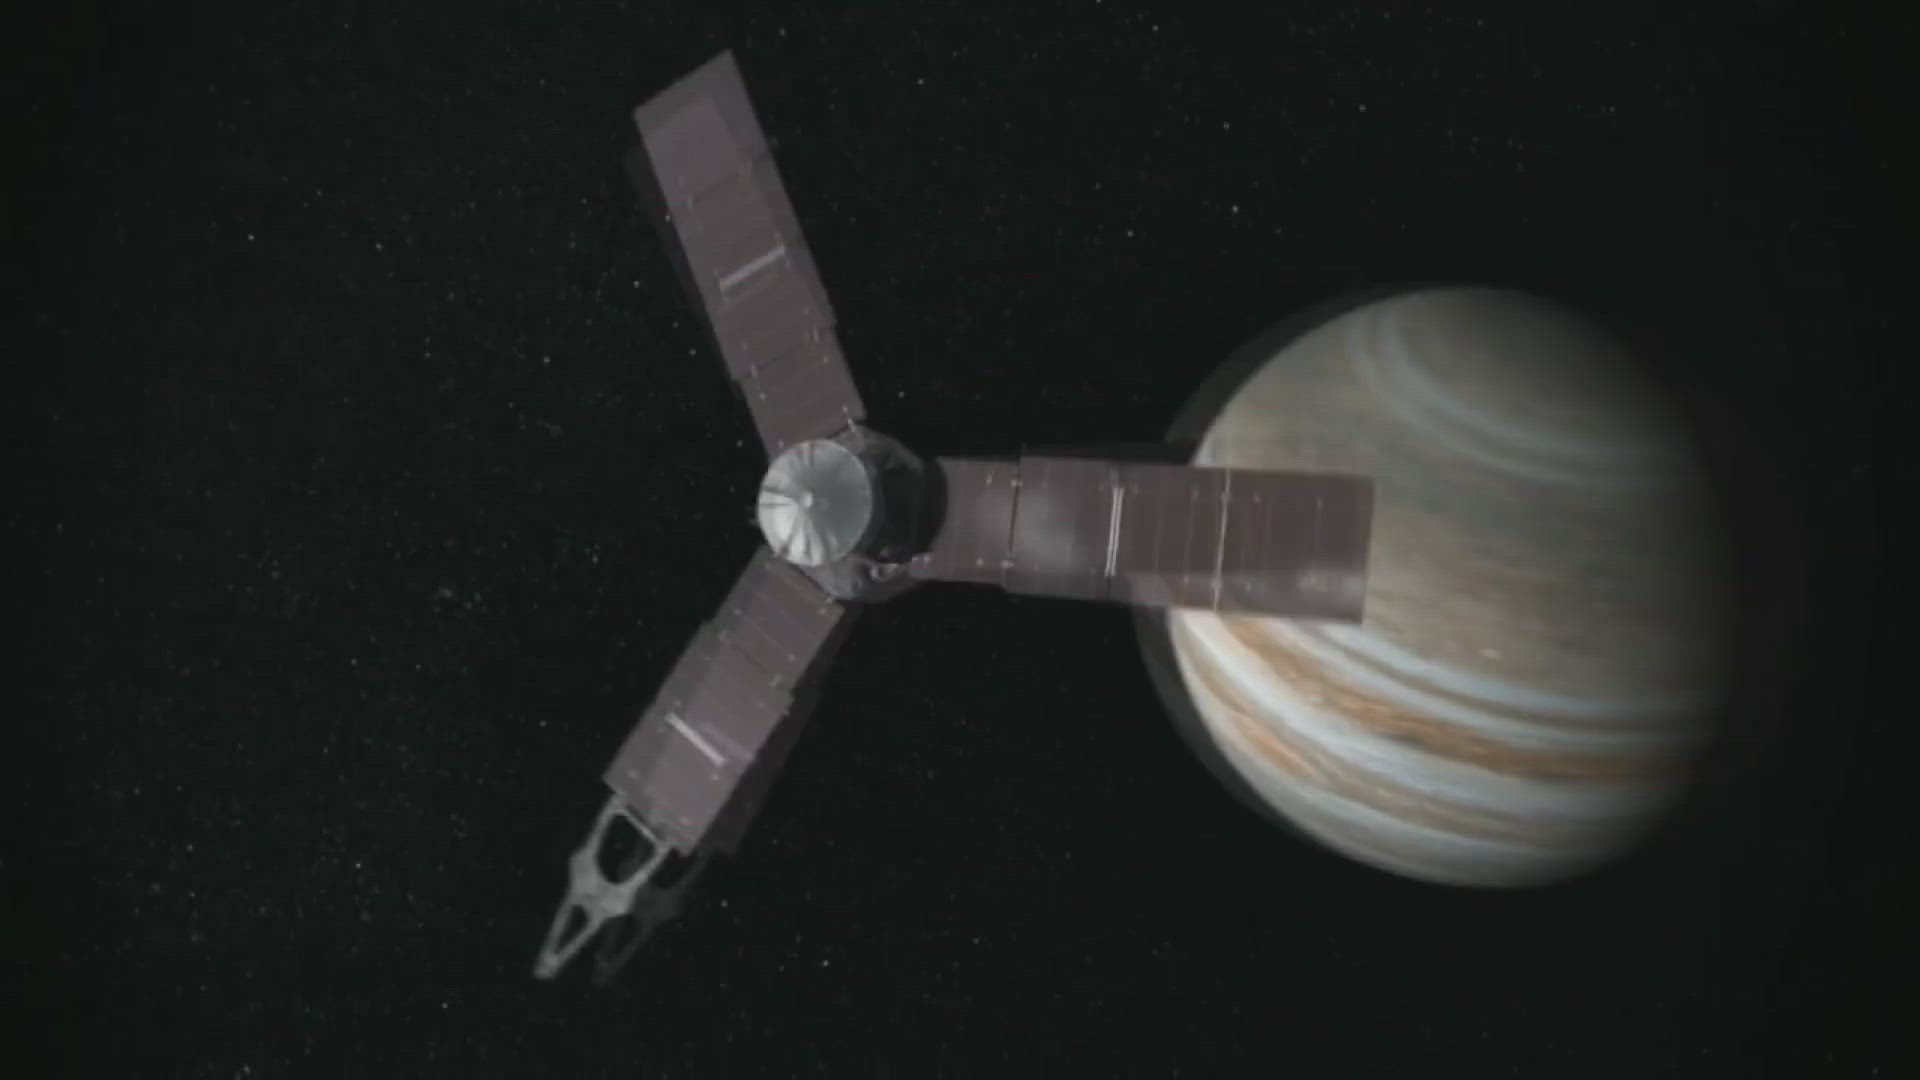 Scientists who helped build the space probe Juno did not expect it would still be working in 2023. It has been exploring Jupiter for the past 12 years.